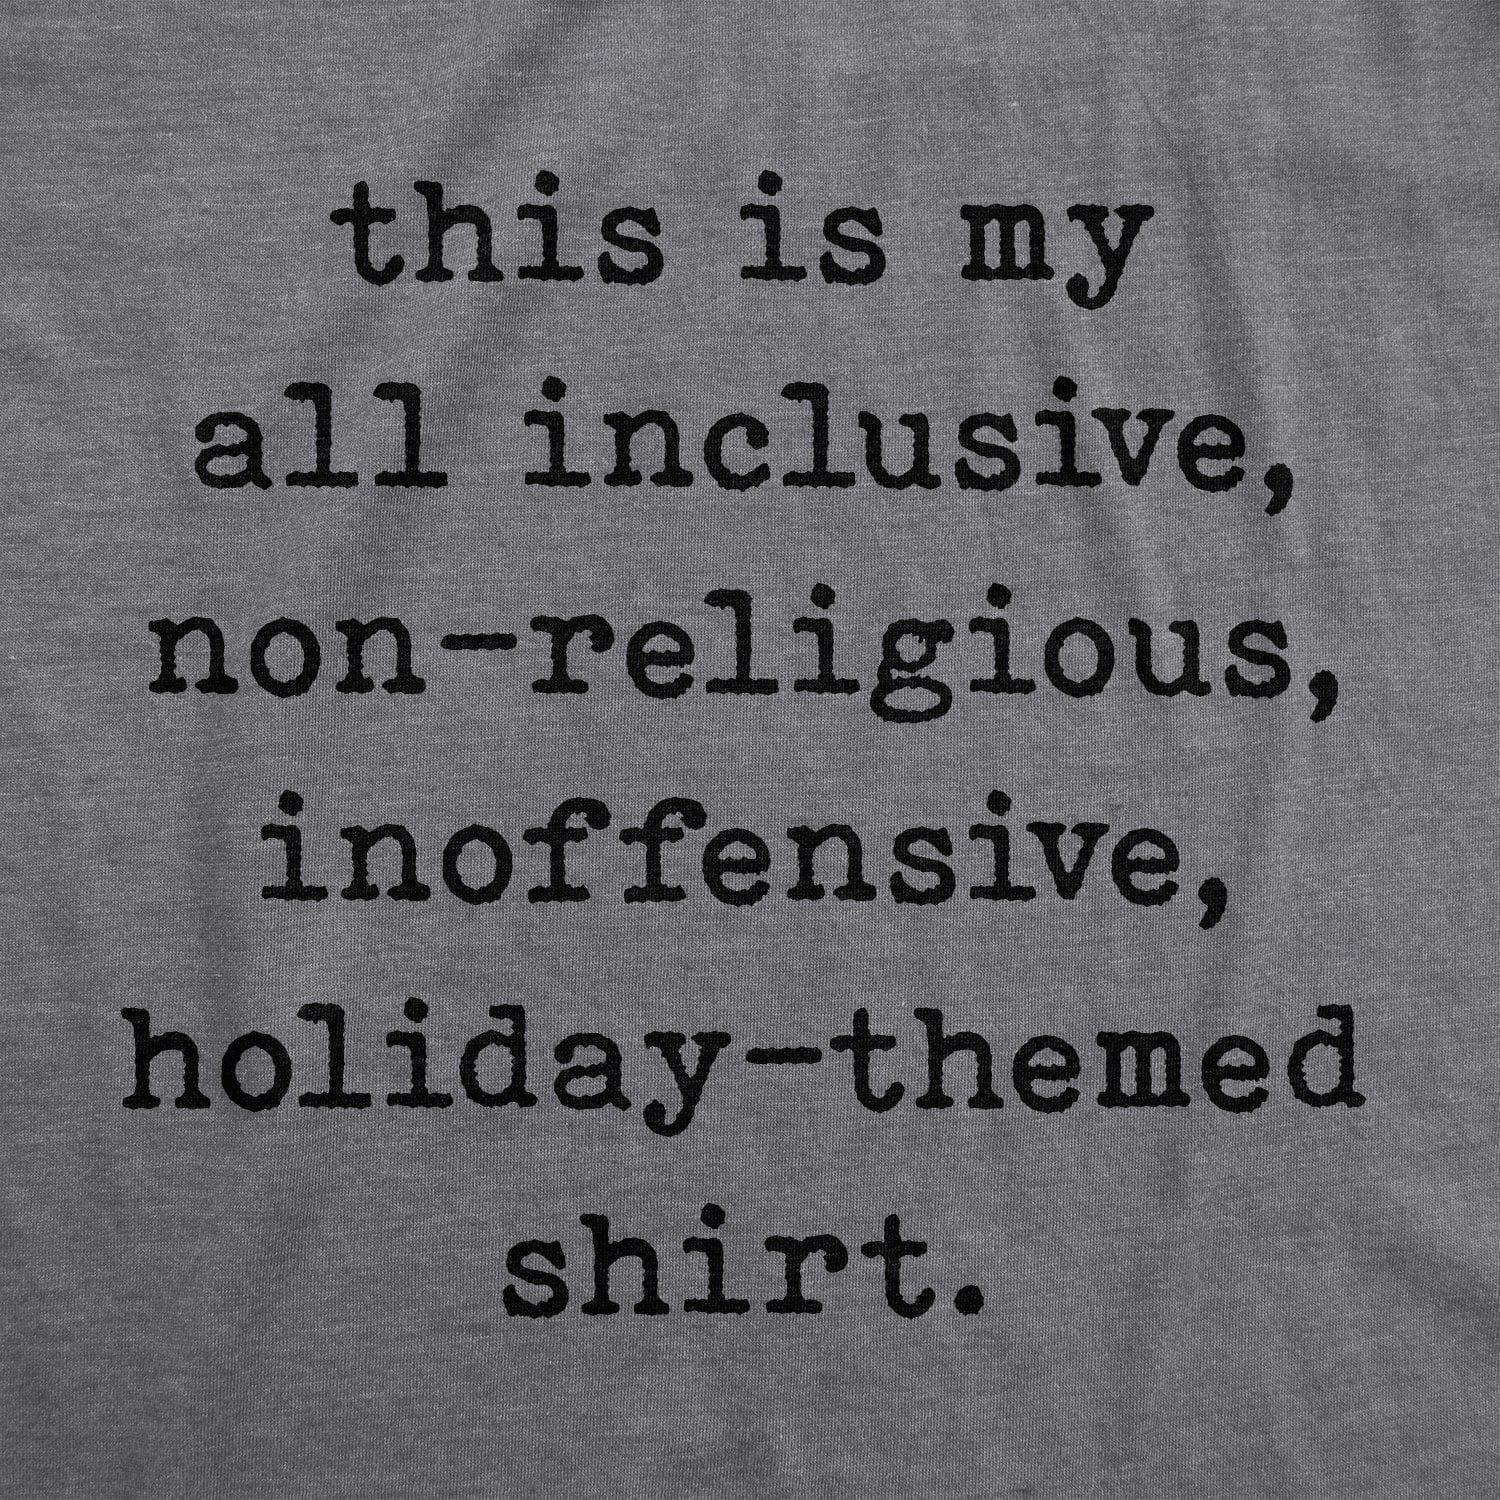 All Inclusive Non-Religious Holiday-Themed Men's Tshirt - Crazy Dog T-Shirts